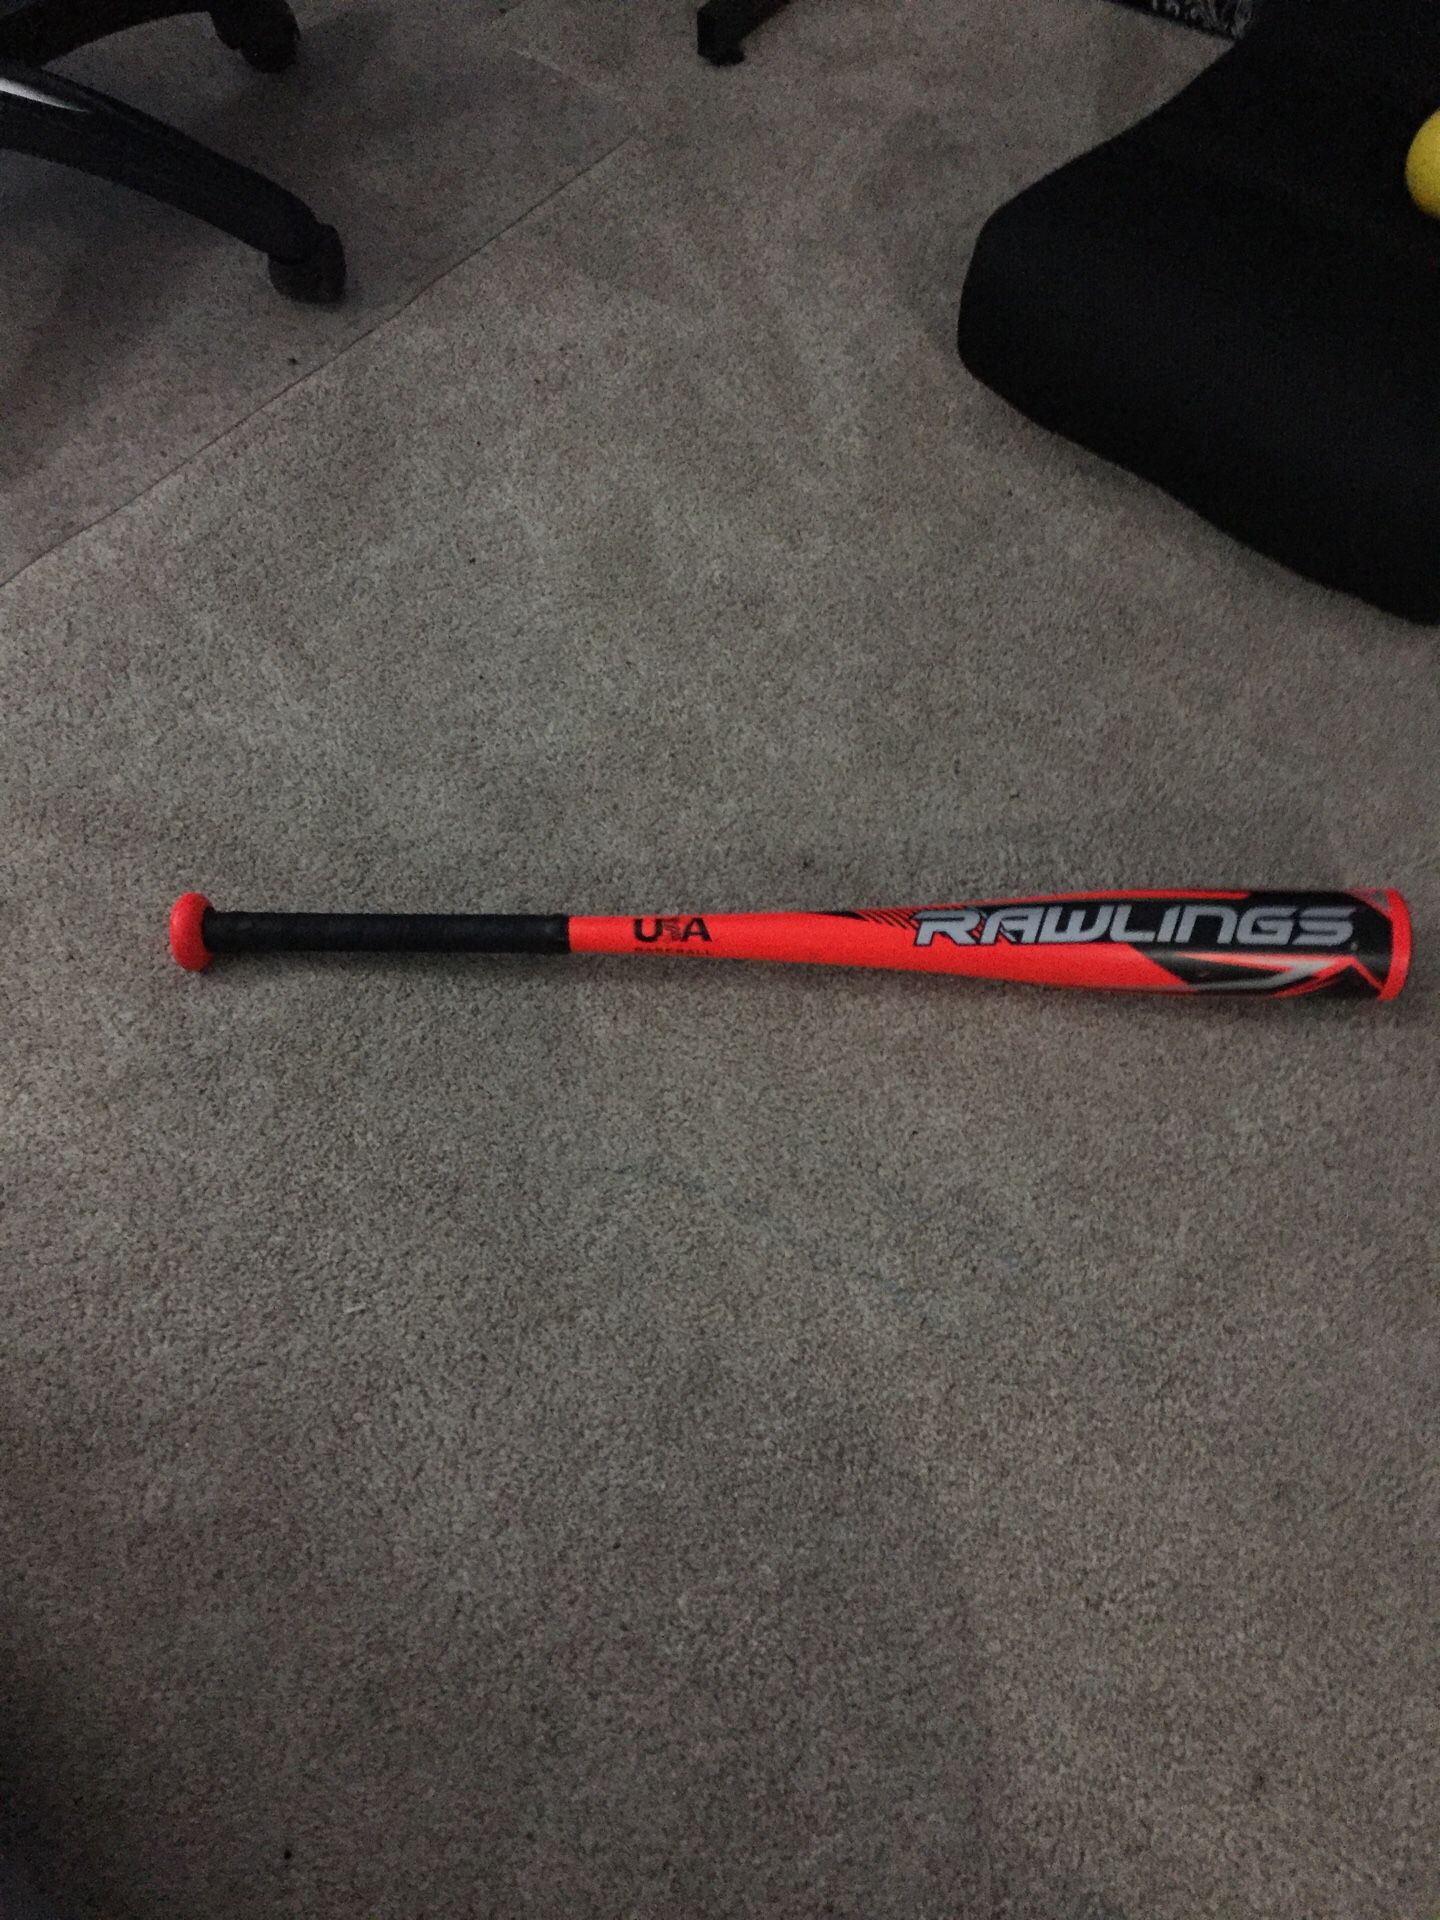 Rawlings Flel 28 inches 20 ounces USA baseball bat very good condition no grip will be happy to make offers or lower price